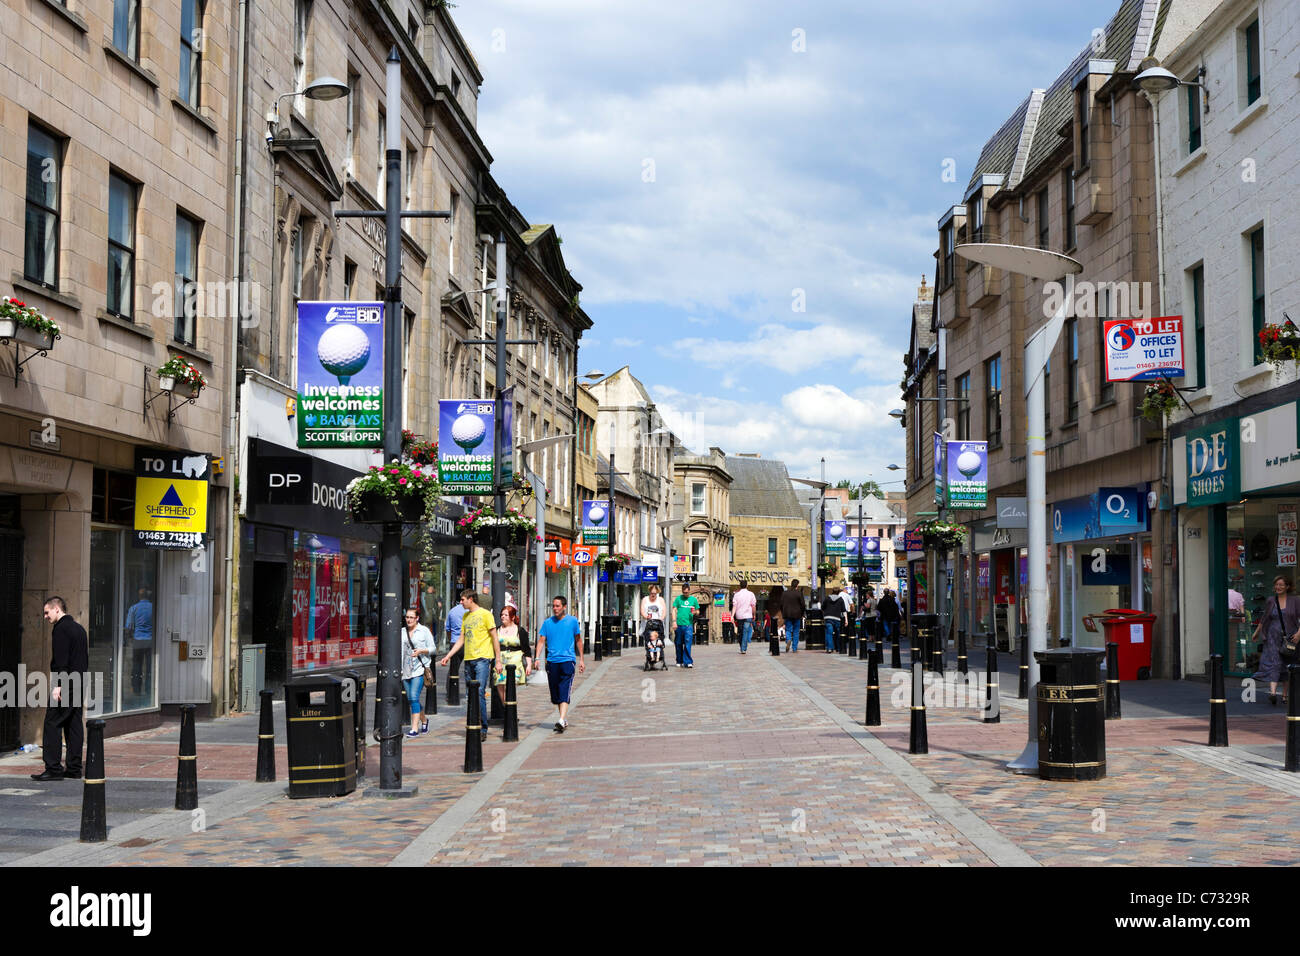 Shops on the High Street in the city centre, Inverness, Highland, Scotland, UK Stock Photo